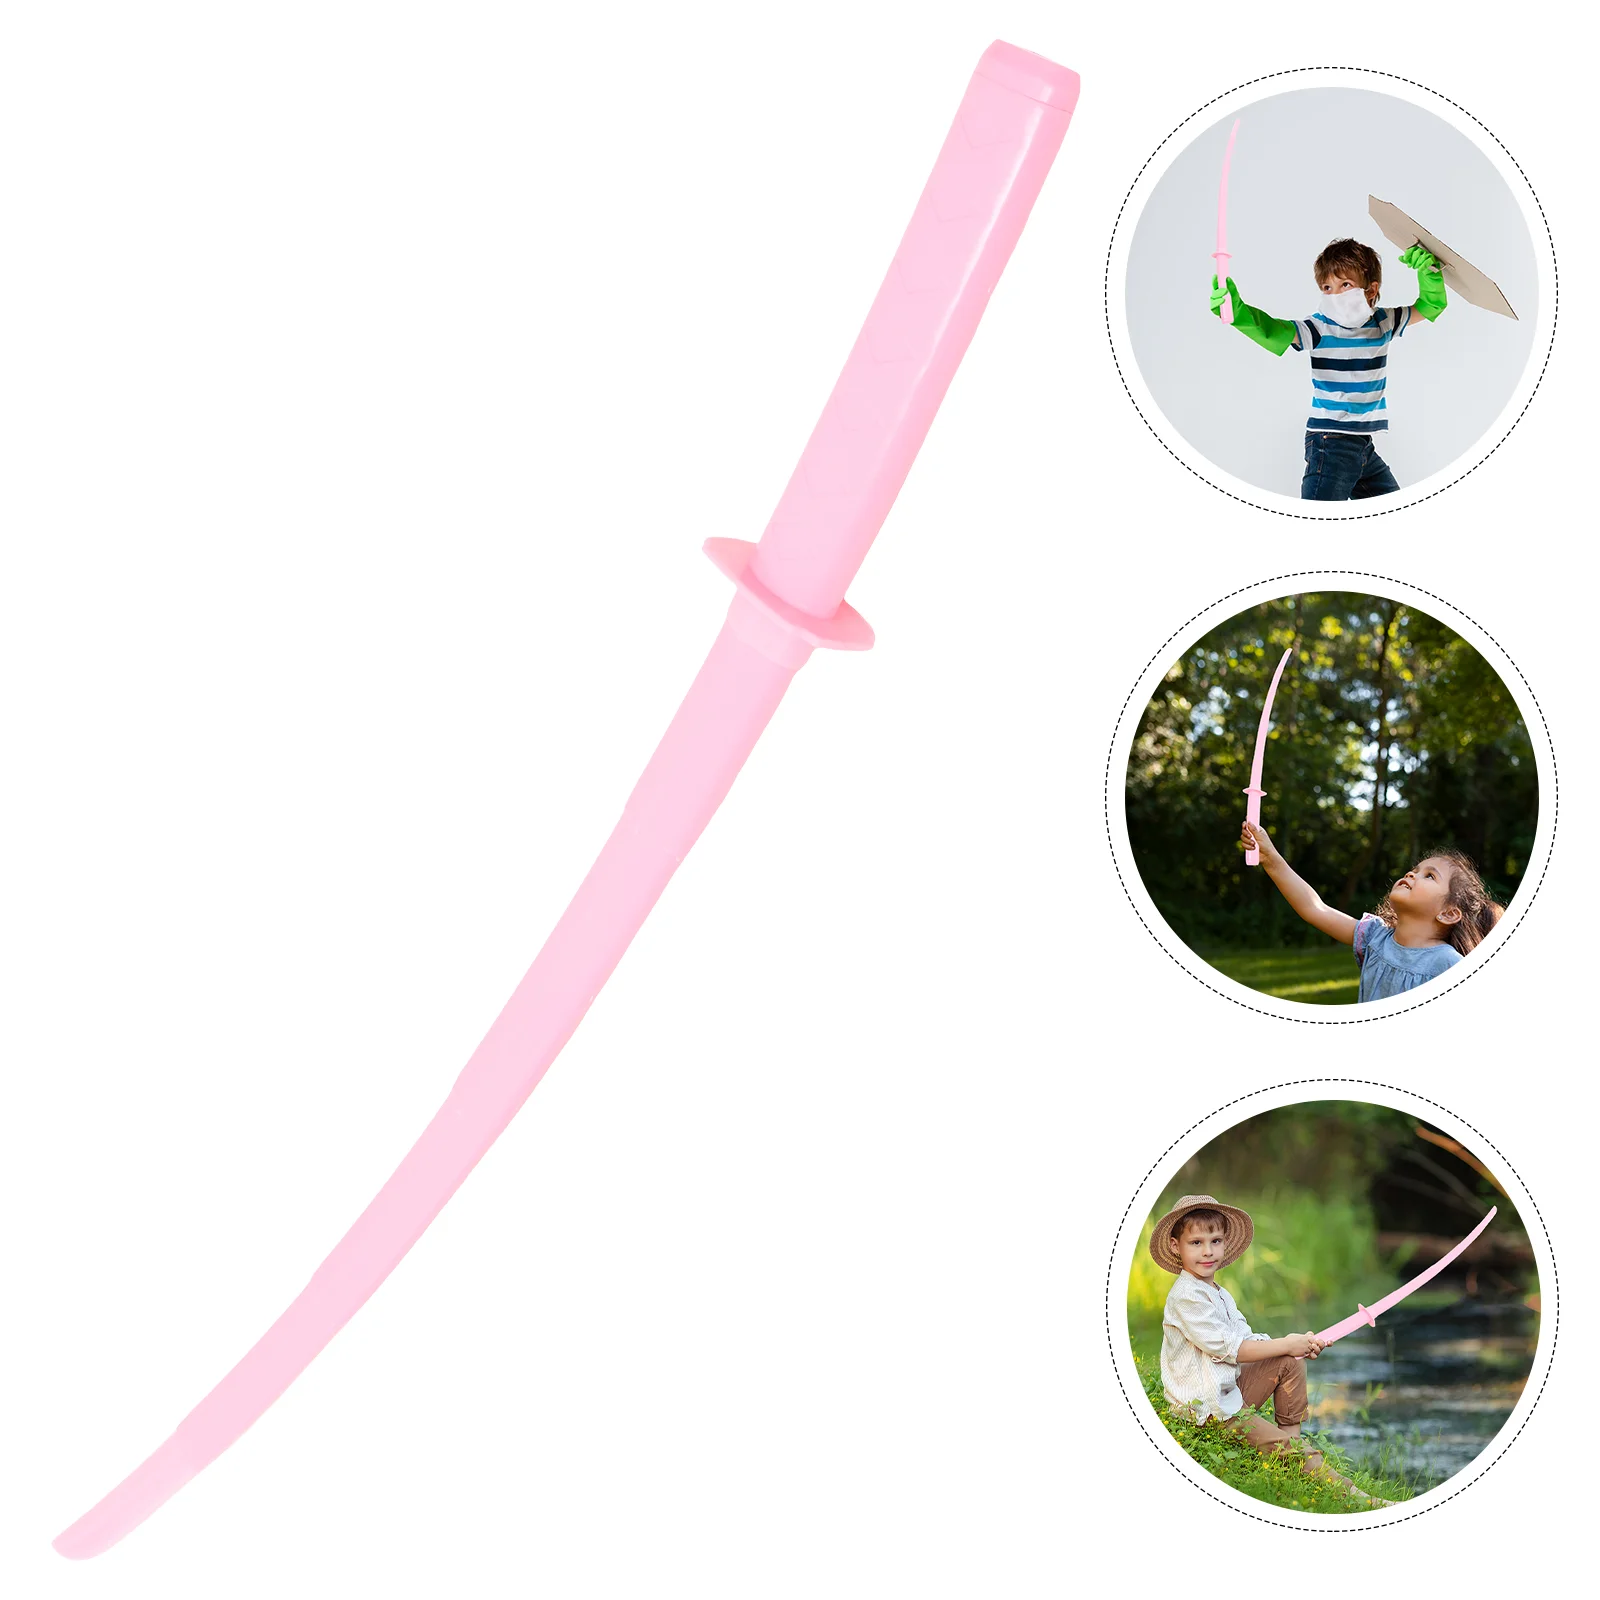 

Retractable Exercise Fencing Performance Prop Kids Toys Training Swords Cosplay Halloween